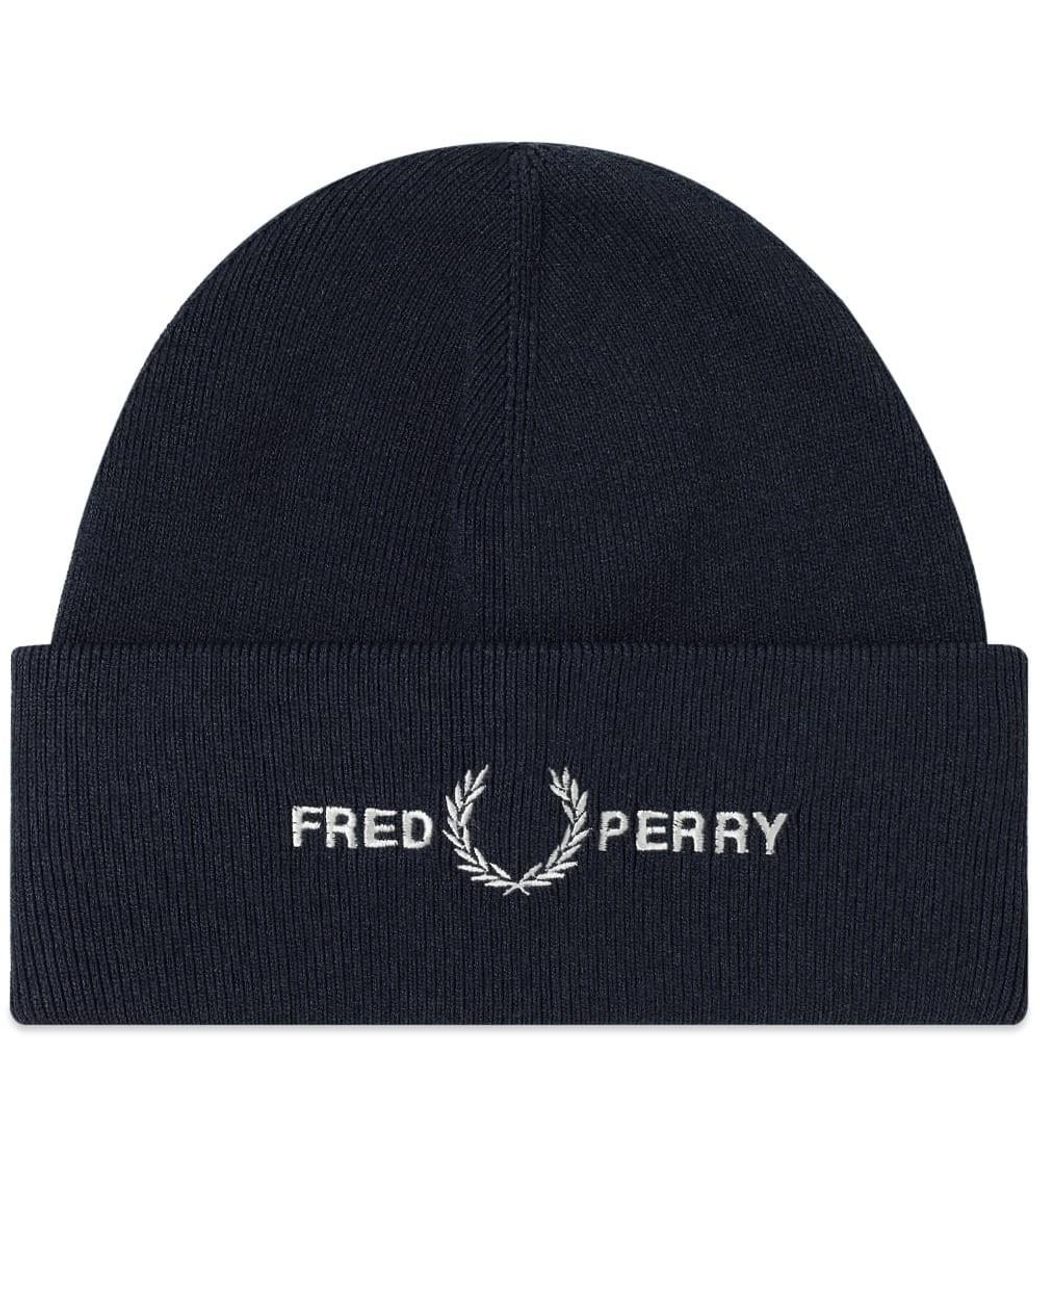 Fred Perry Synthetic Embroidered Logo Beanie in Blue for Men - Lyst